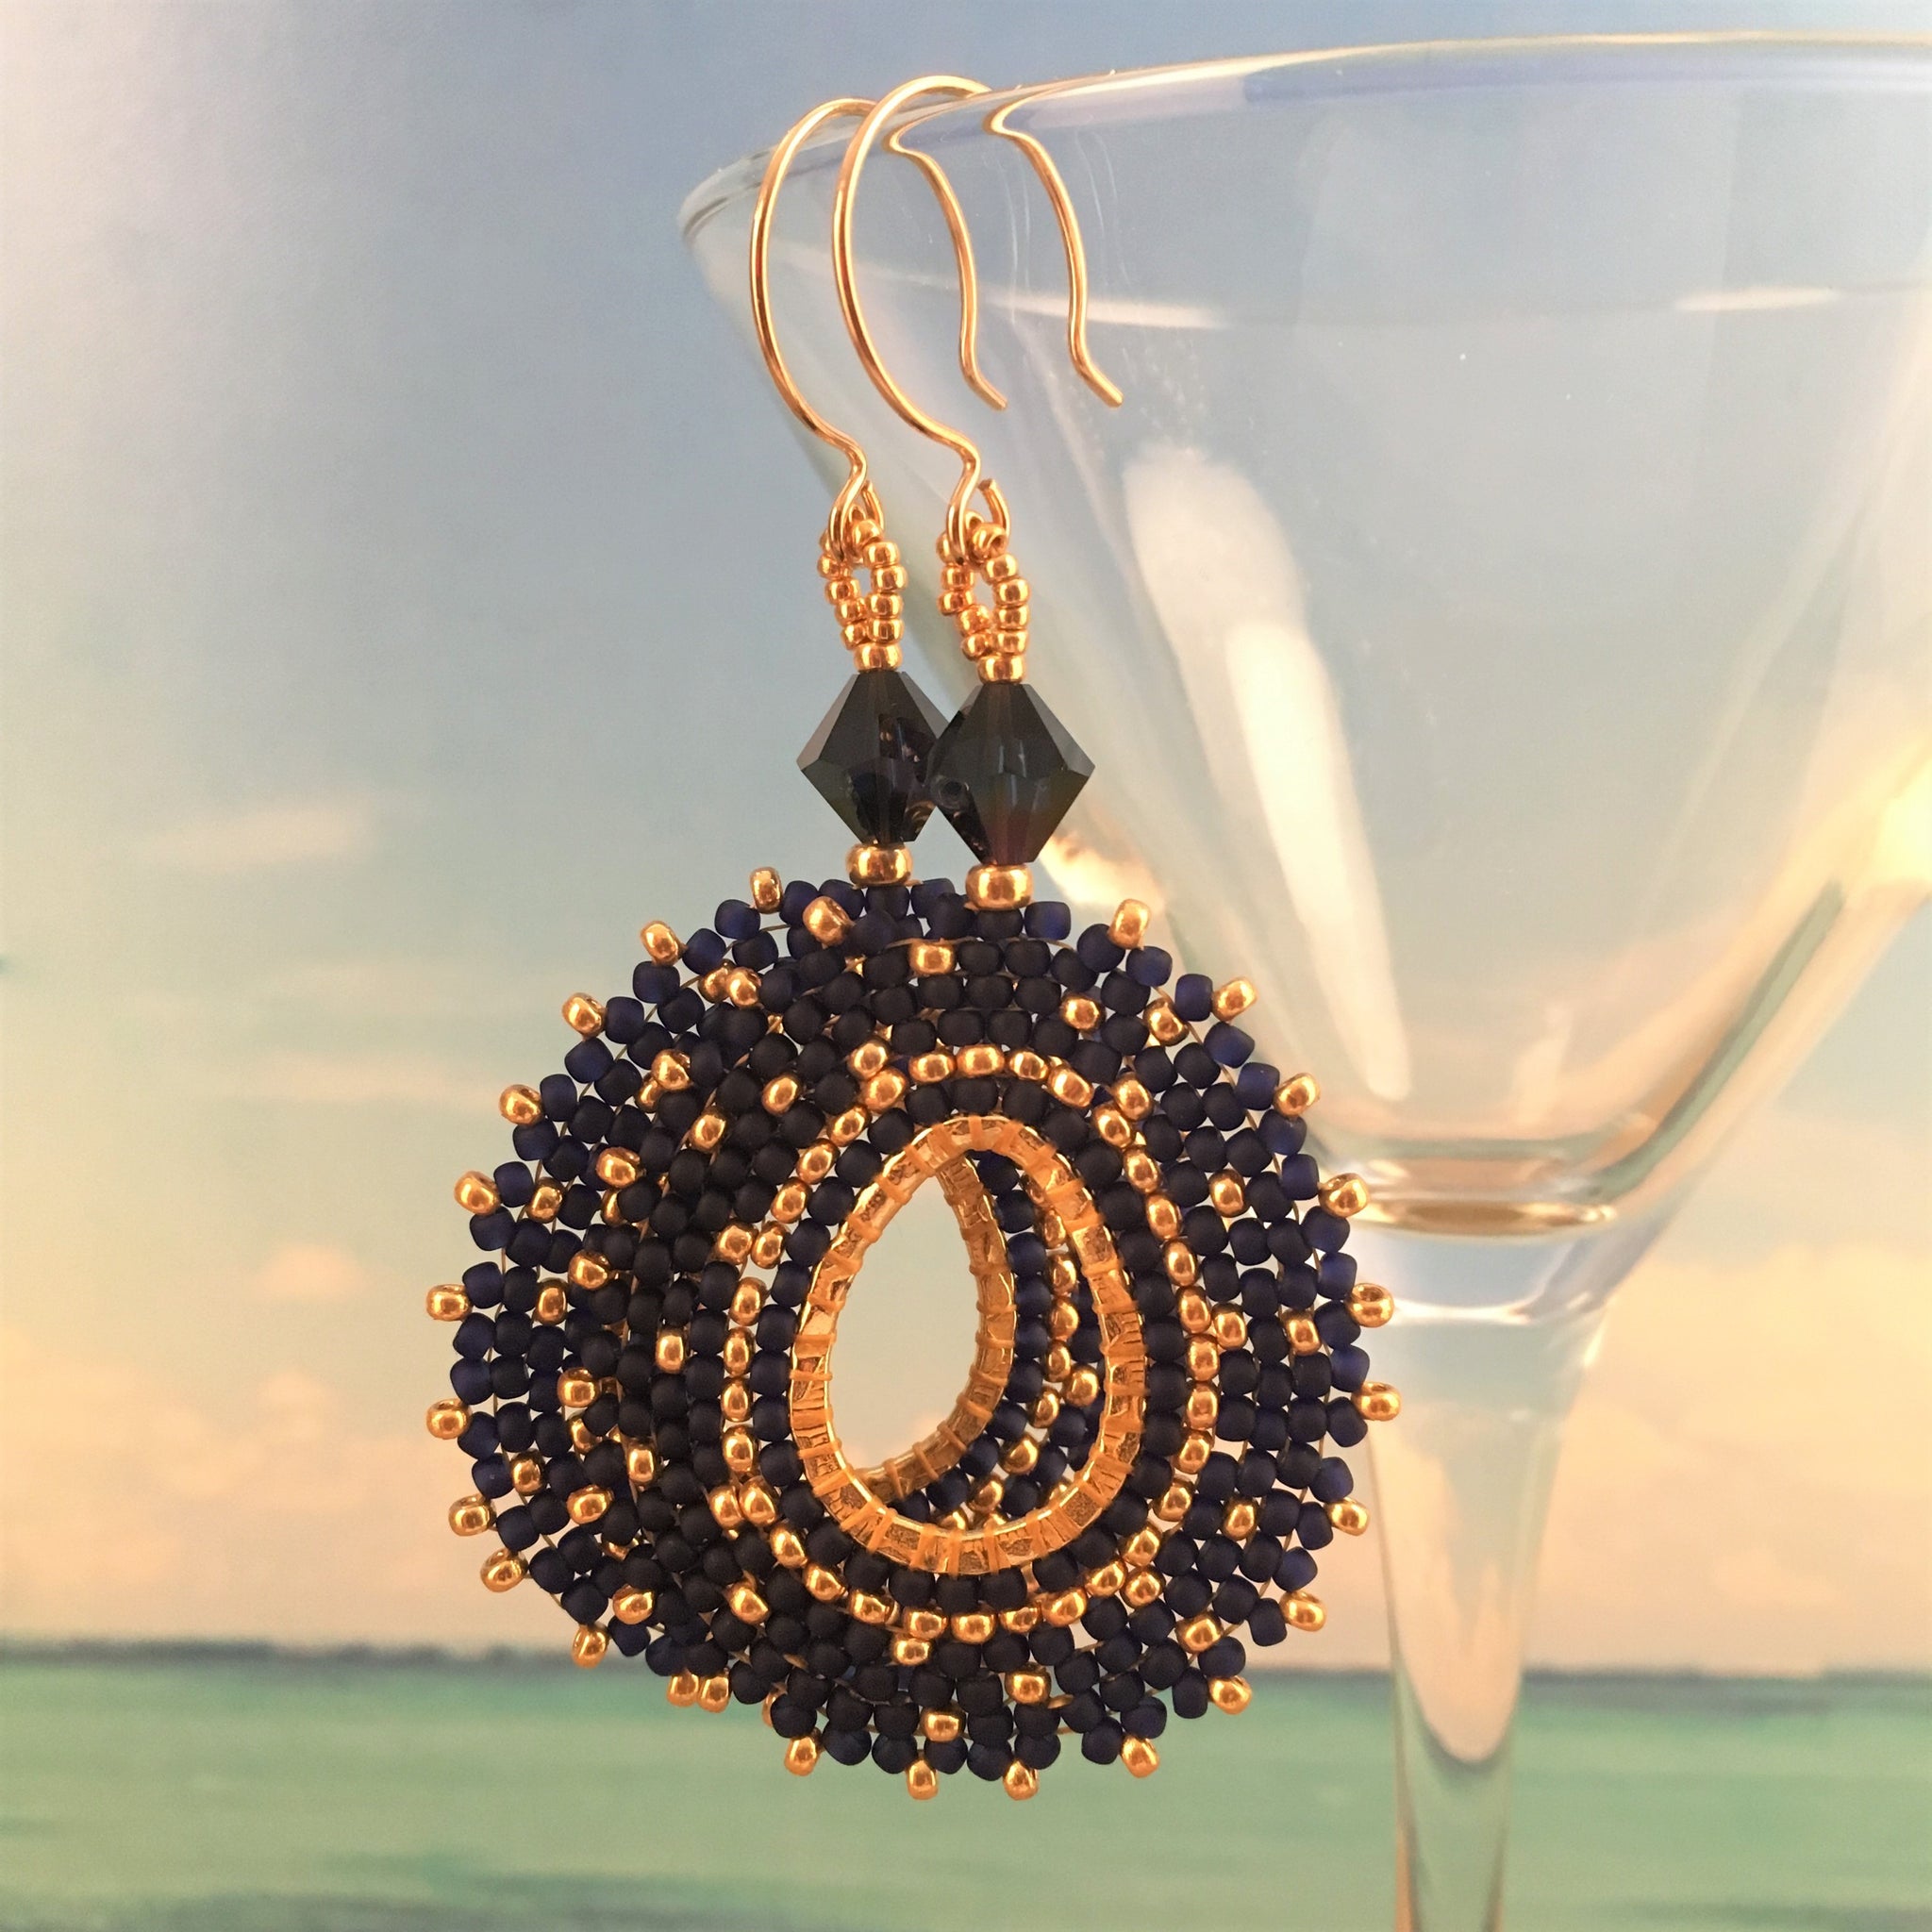 Deep Cobalt Blue and Gold Beaded Oval Earrings with Swarovski Crystals handmade Beaded by the Beach elegant 14K gold-filled